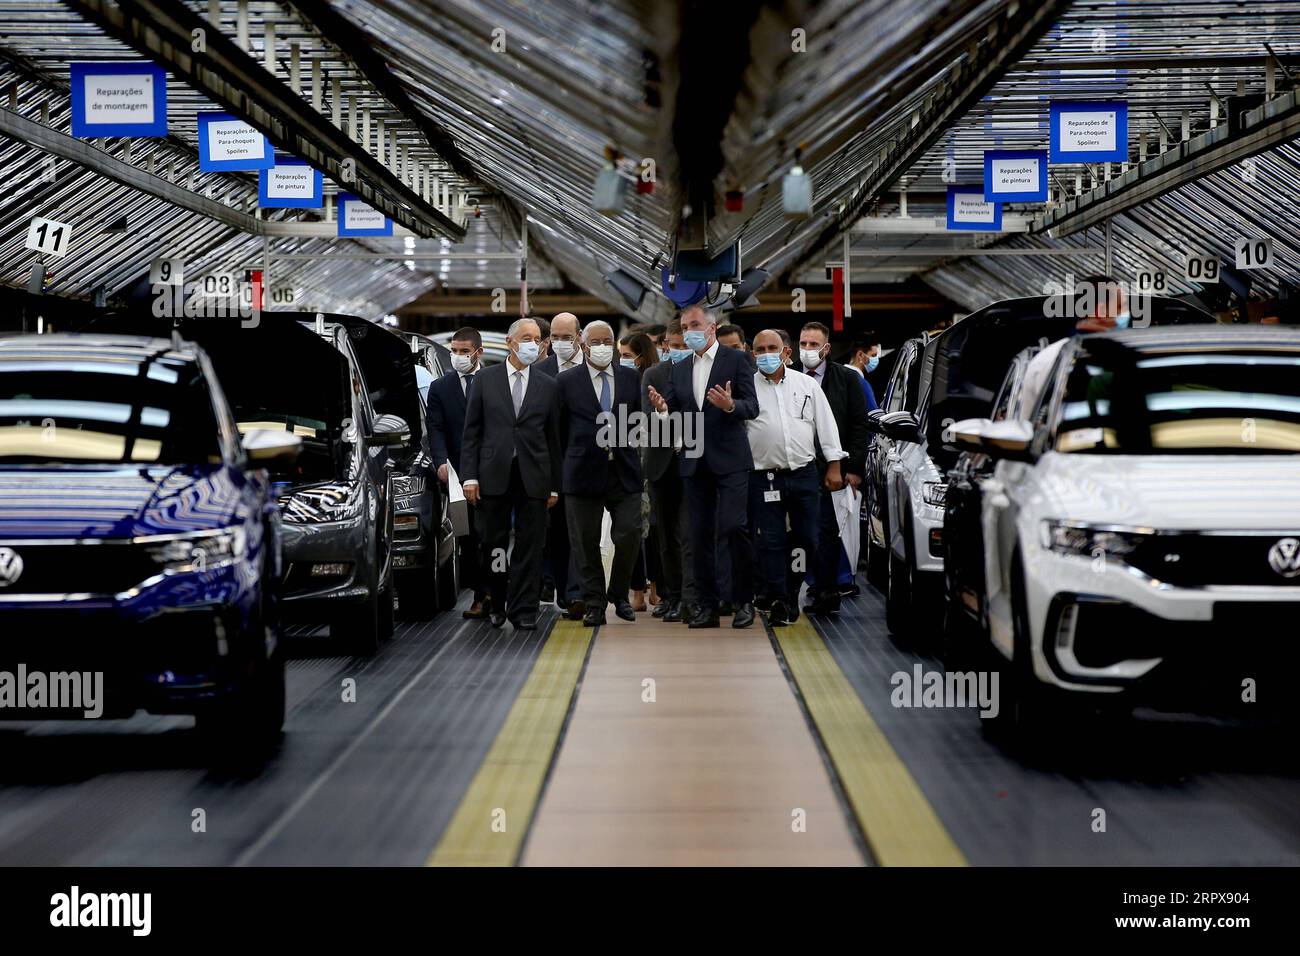 News Bilder des Tages 200514 -- LISBON, May 14, 2020 -- Portuguese President Marcelo Rebelo de Sousa 1st L, front and Portuguese Prime Minister Antonio Costa 2nd L, front visit the Volkswagen Autoeuropa car factory in Palmela, Portugal, May 13, 2020. Portuguese President Marcelo Rebelo de Sousa and Prime Minister Antonio Costa on Wednesday encouraged all industries to restart under strict conditions amid the COVID-19 pandemic, Lusa News Agency reported. After their joint visit to automotive assembly plant Autoeuropa, the two leaders expressed their confidence in the resumption of production fo Stock Photo